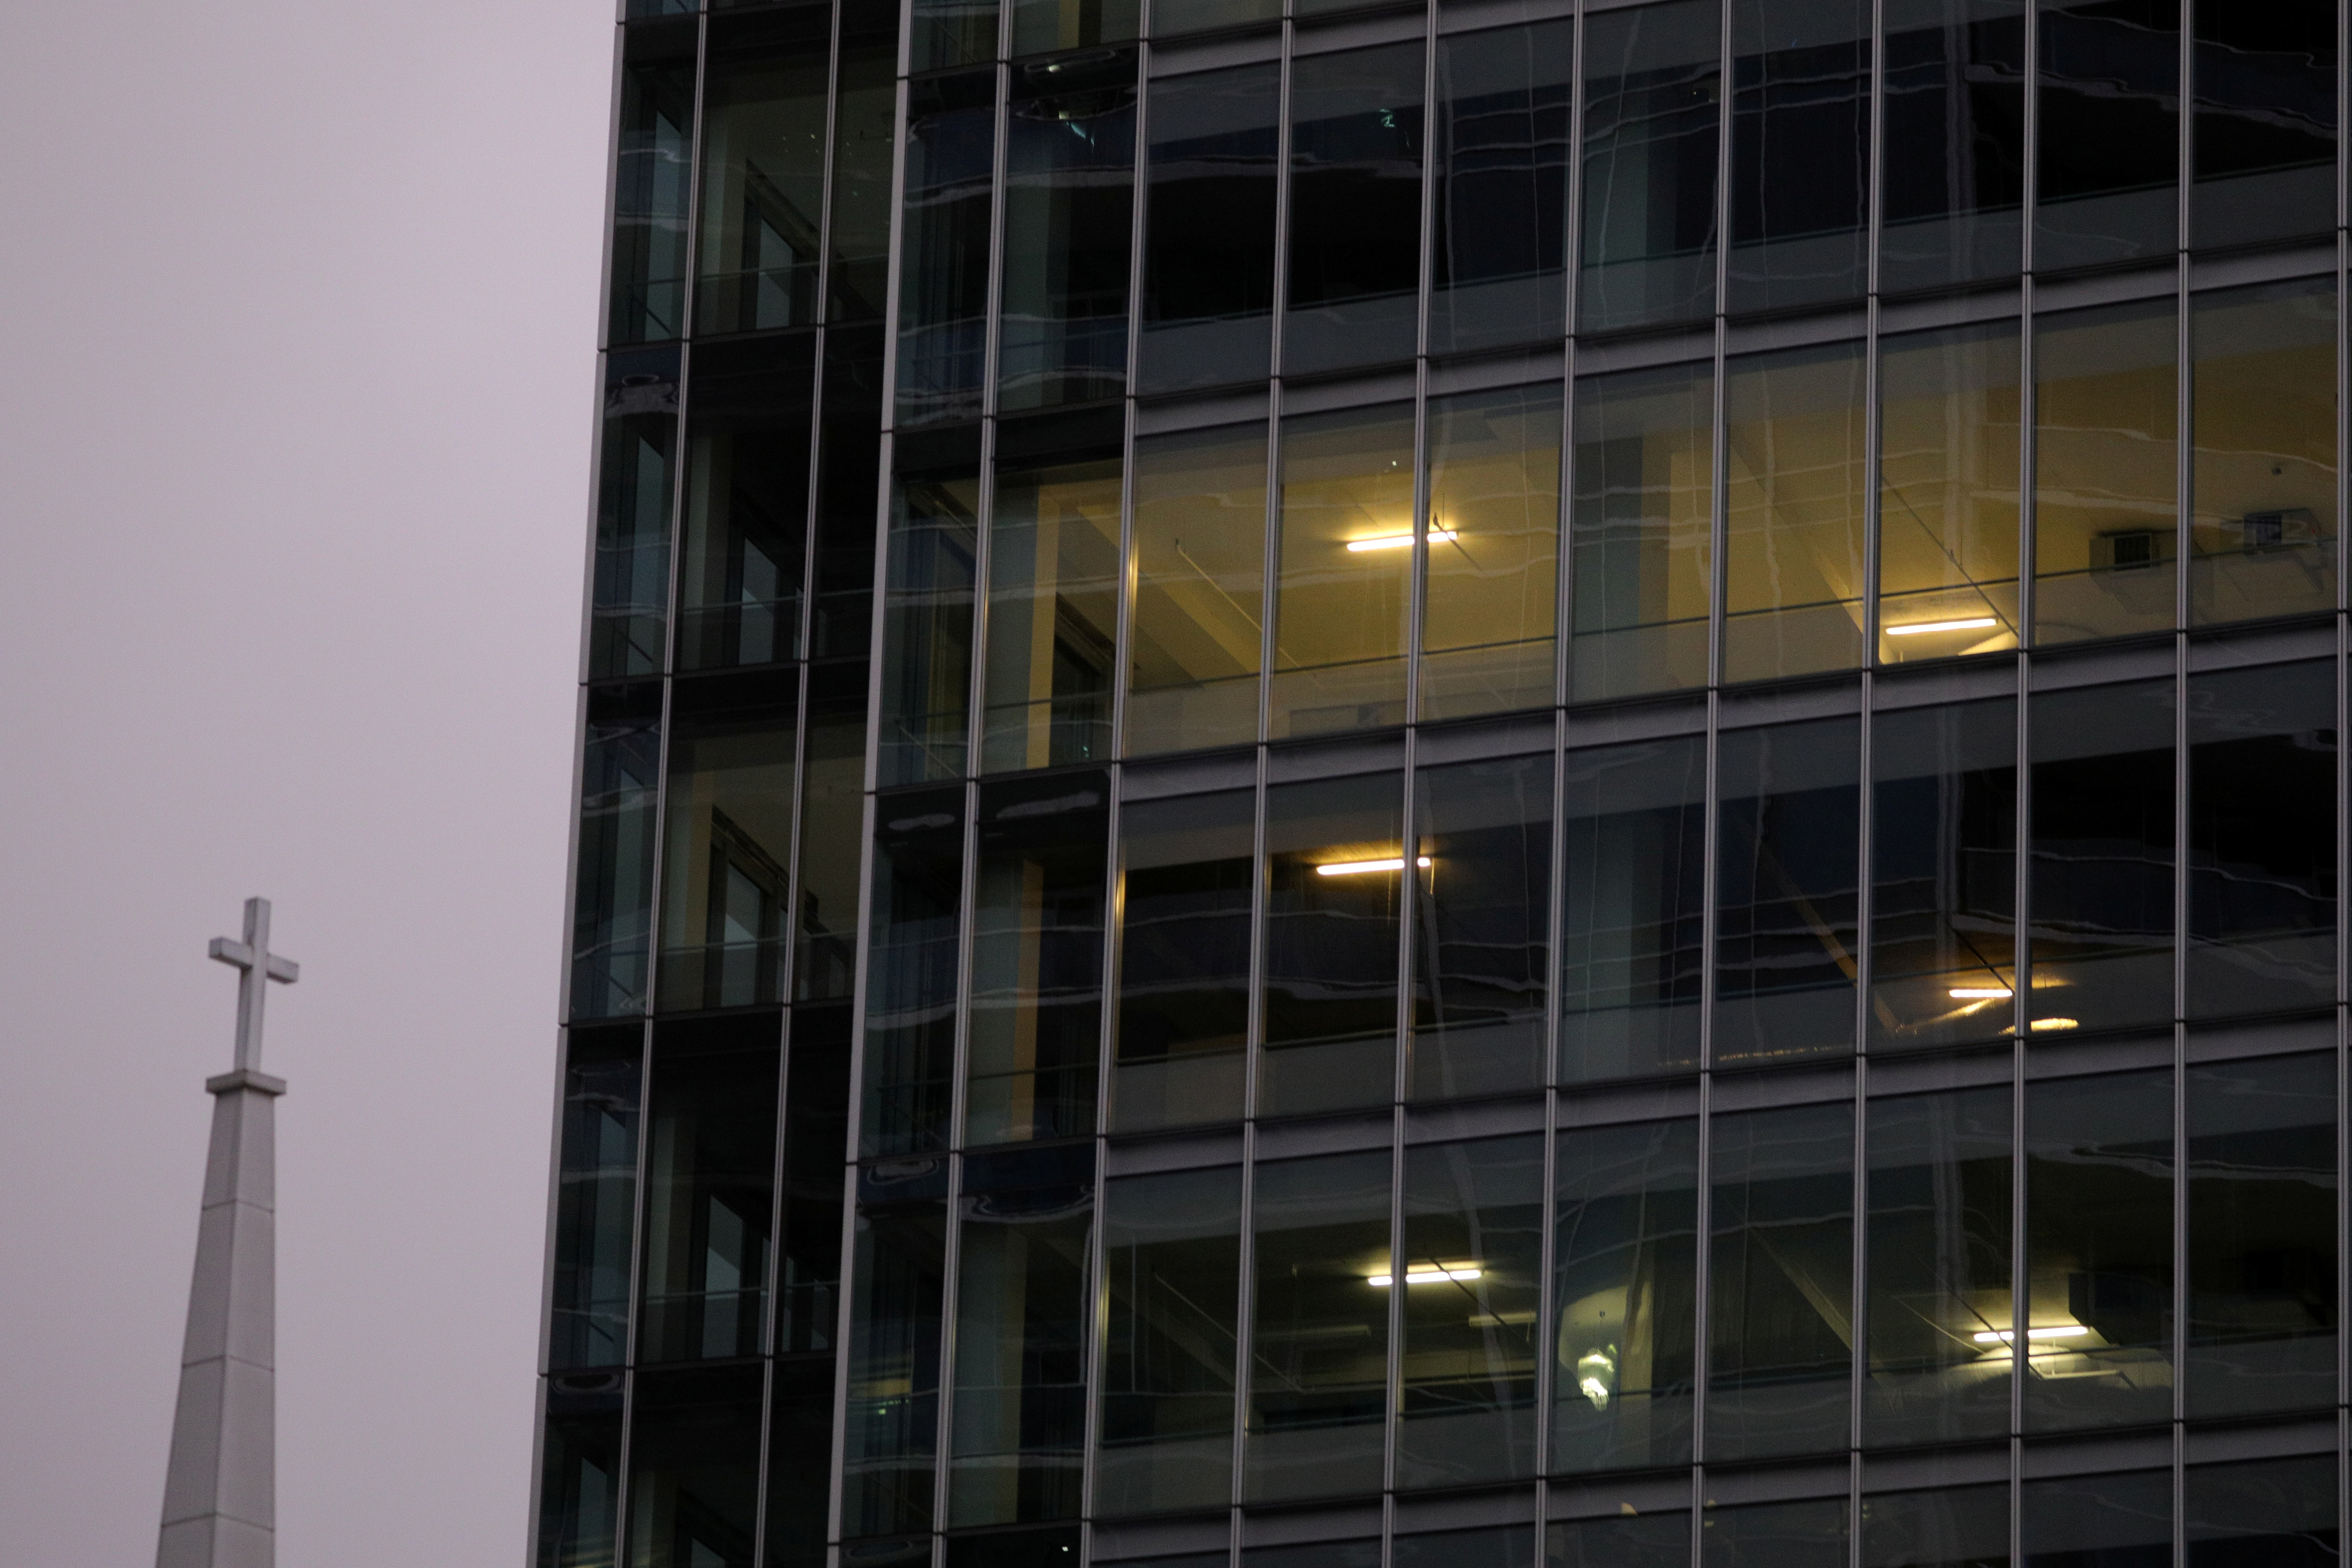 Office lights are illuminated in a high rise building at dusk, as Governor Ralph Northam's (D-VA) stay-at-home order continues due to the coronavirus disease (COVID-19) outbreak, in the Rosslyn section of Arlington, Virginia, U.S., April 30, 2020. REUTERS/Tom Brenner